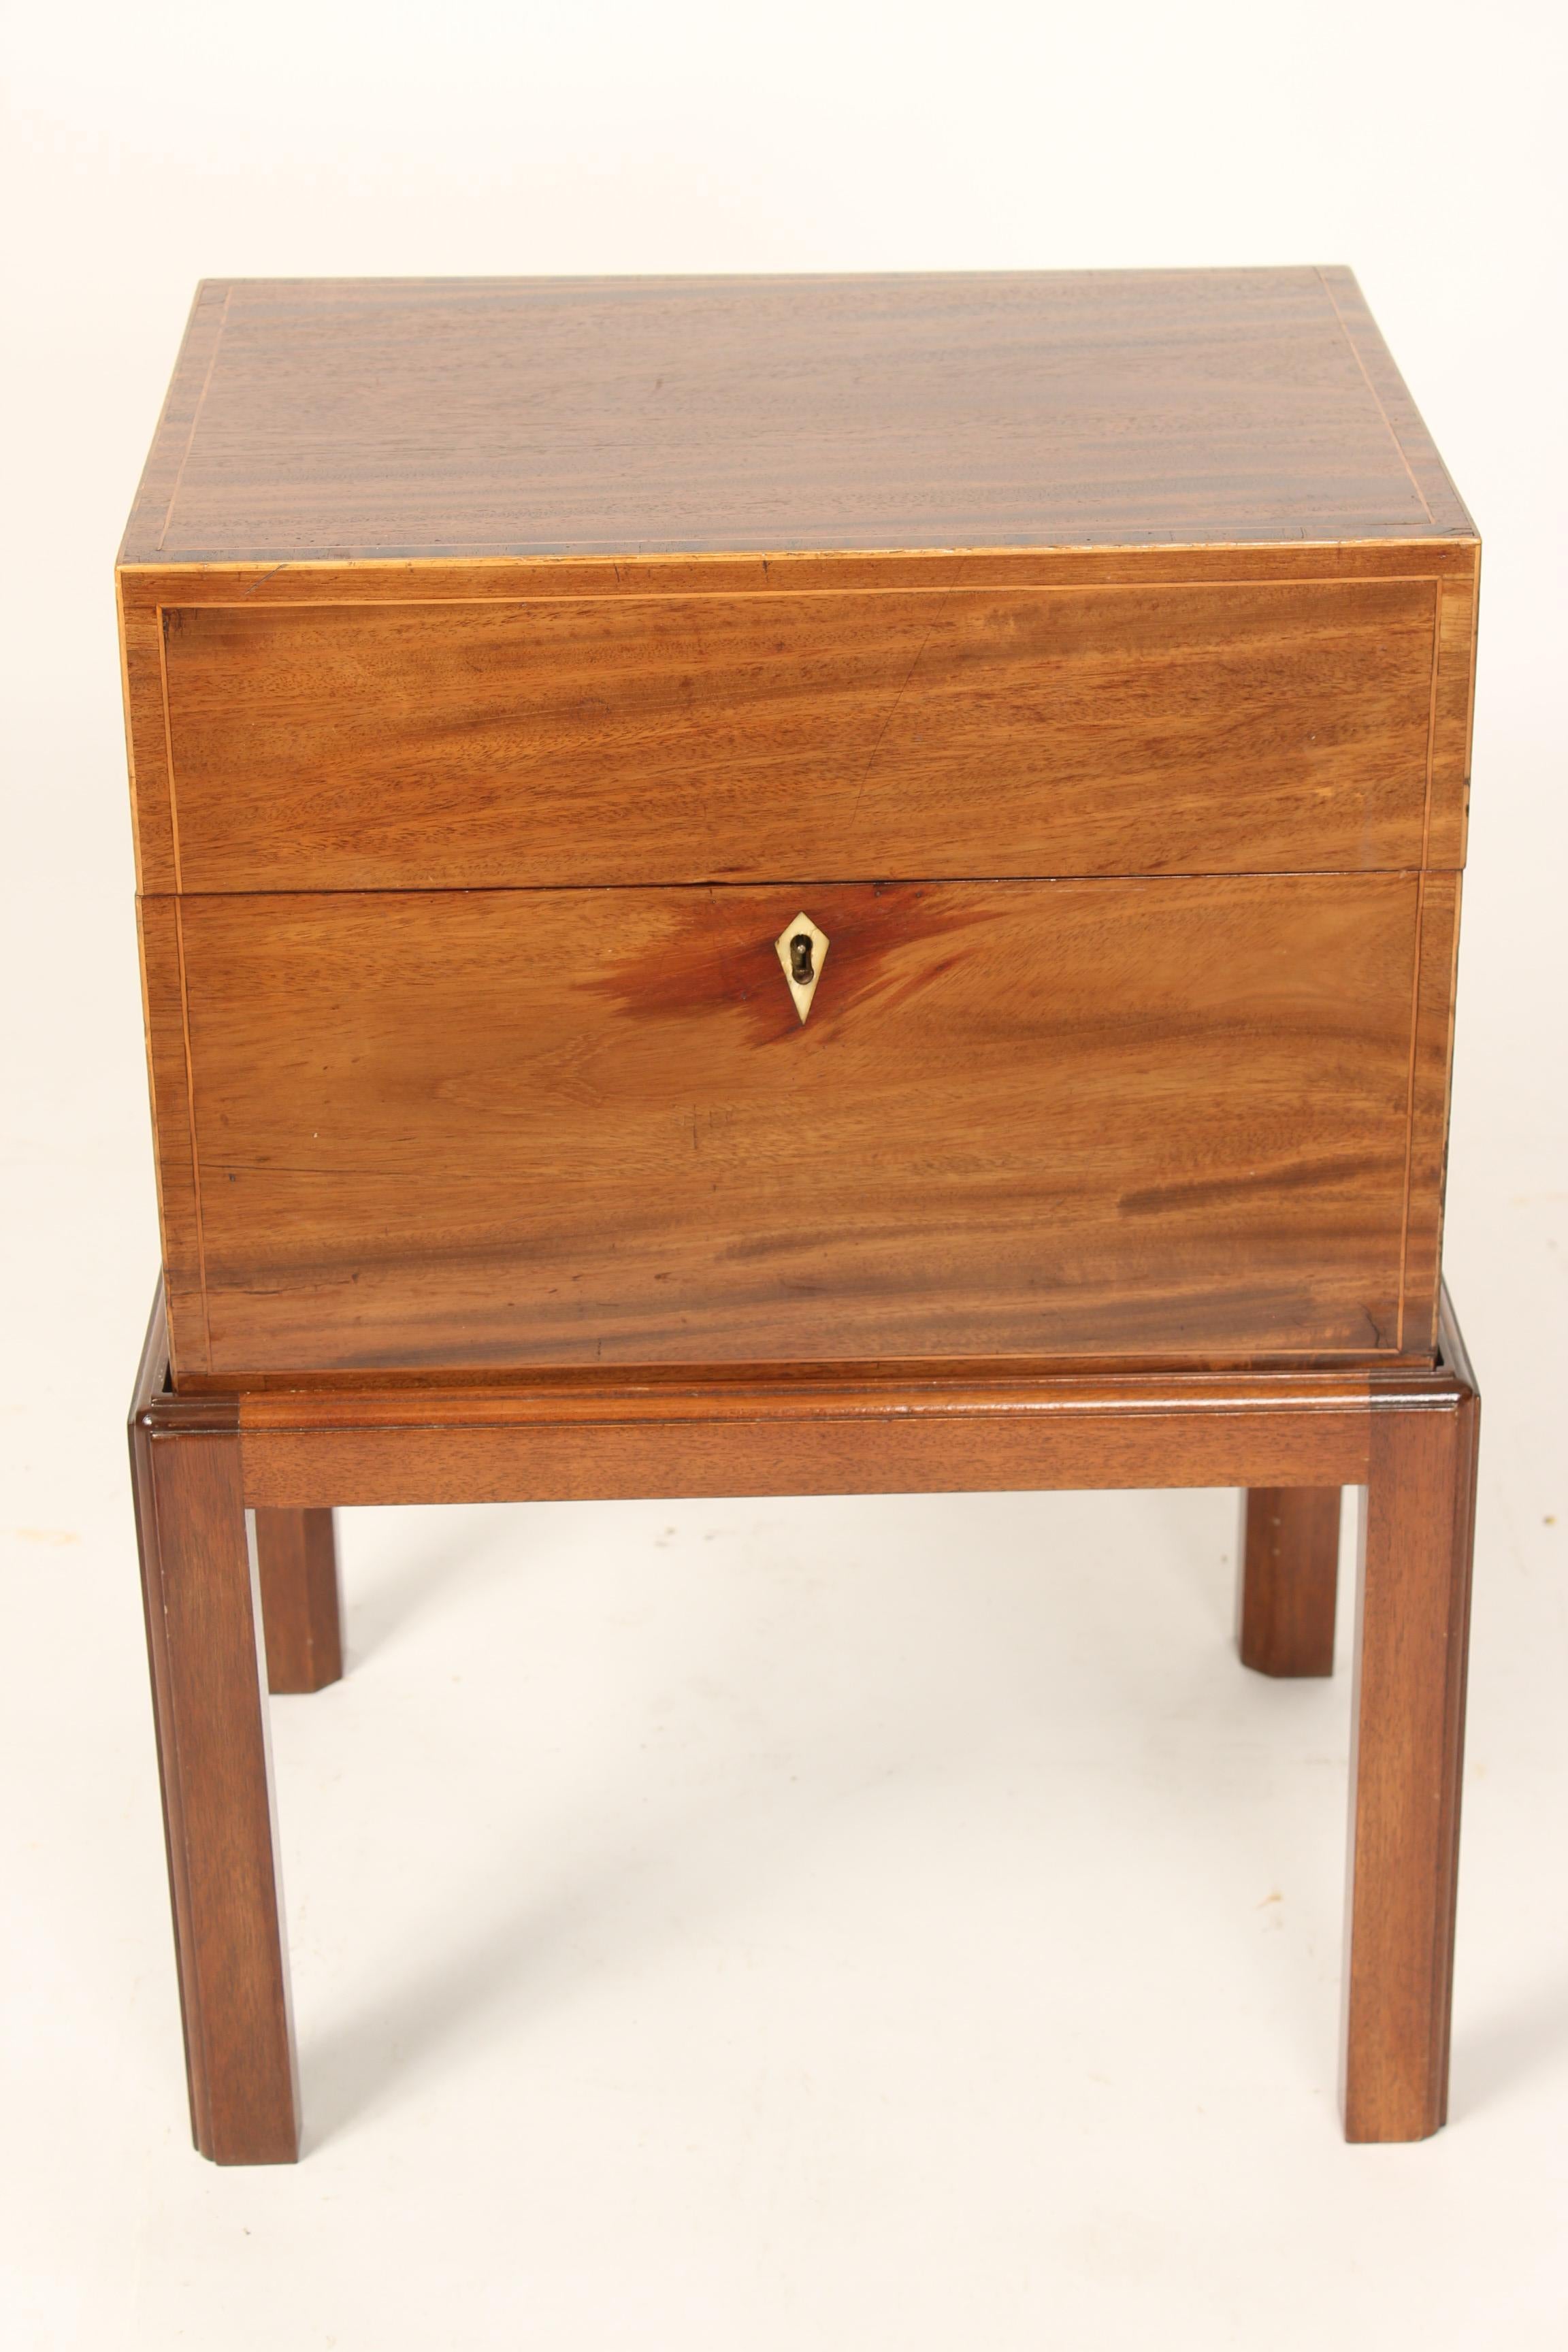 English Edwardian box (circa 1910) on a late 20th century stand. Nicely figured mahogany, cross banded top, front, sides and back with a bone shield shaped escutcheon and brass handles on the sides. The lock stamped secure lever.